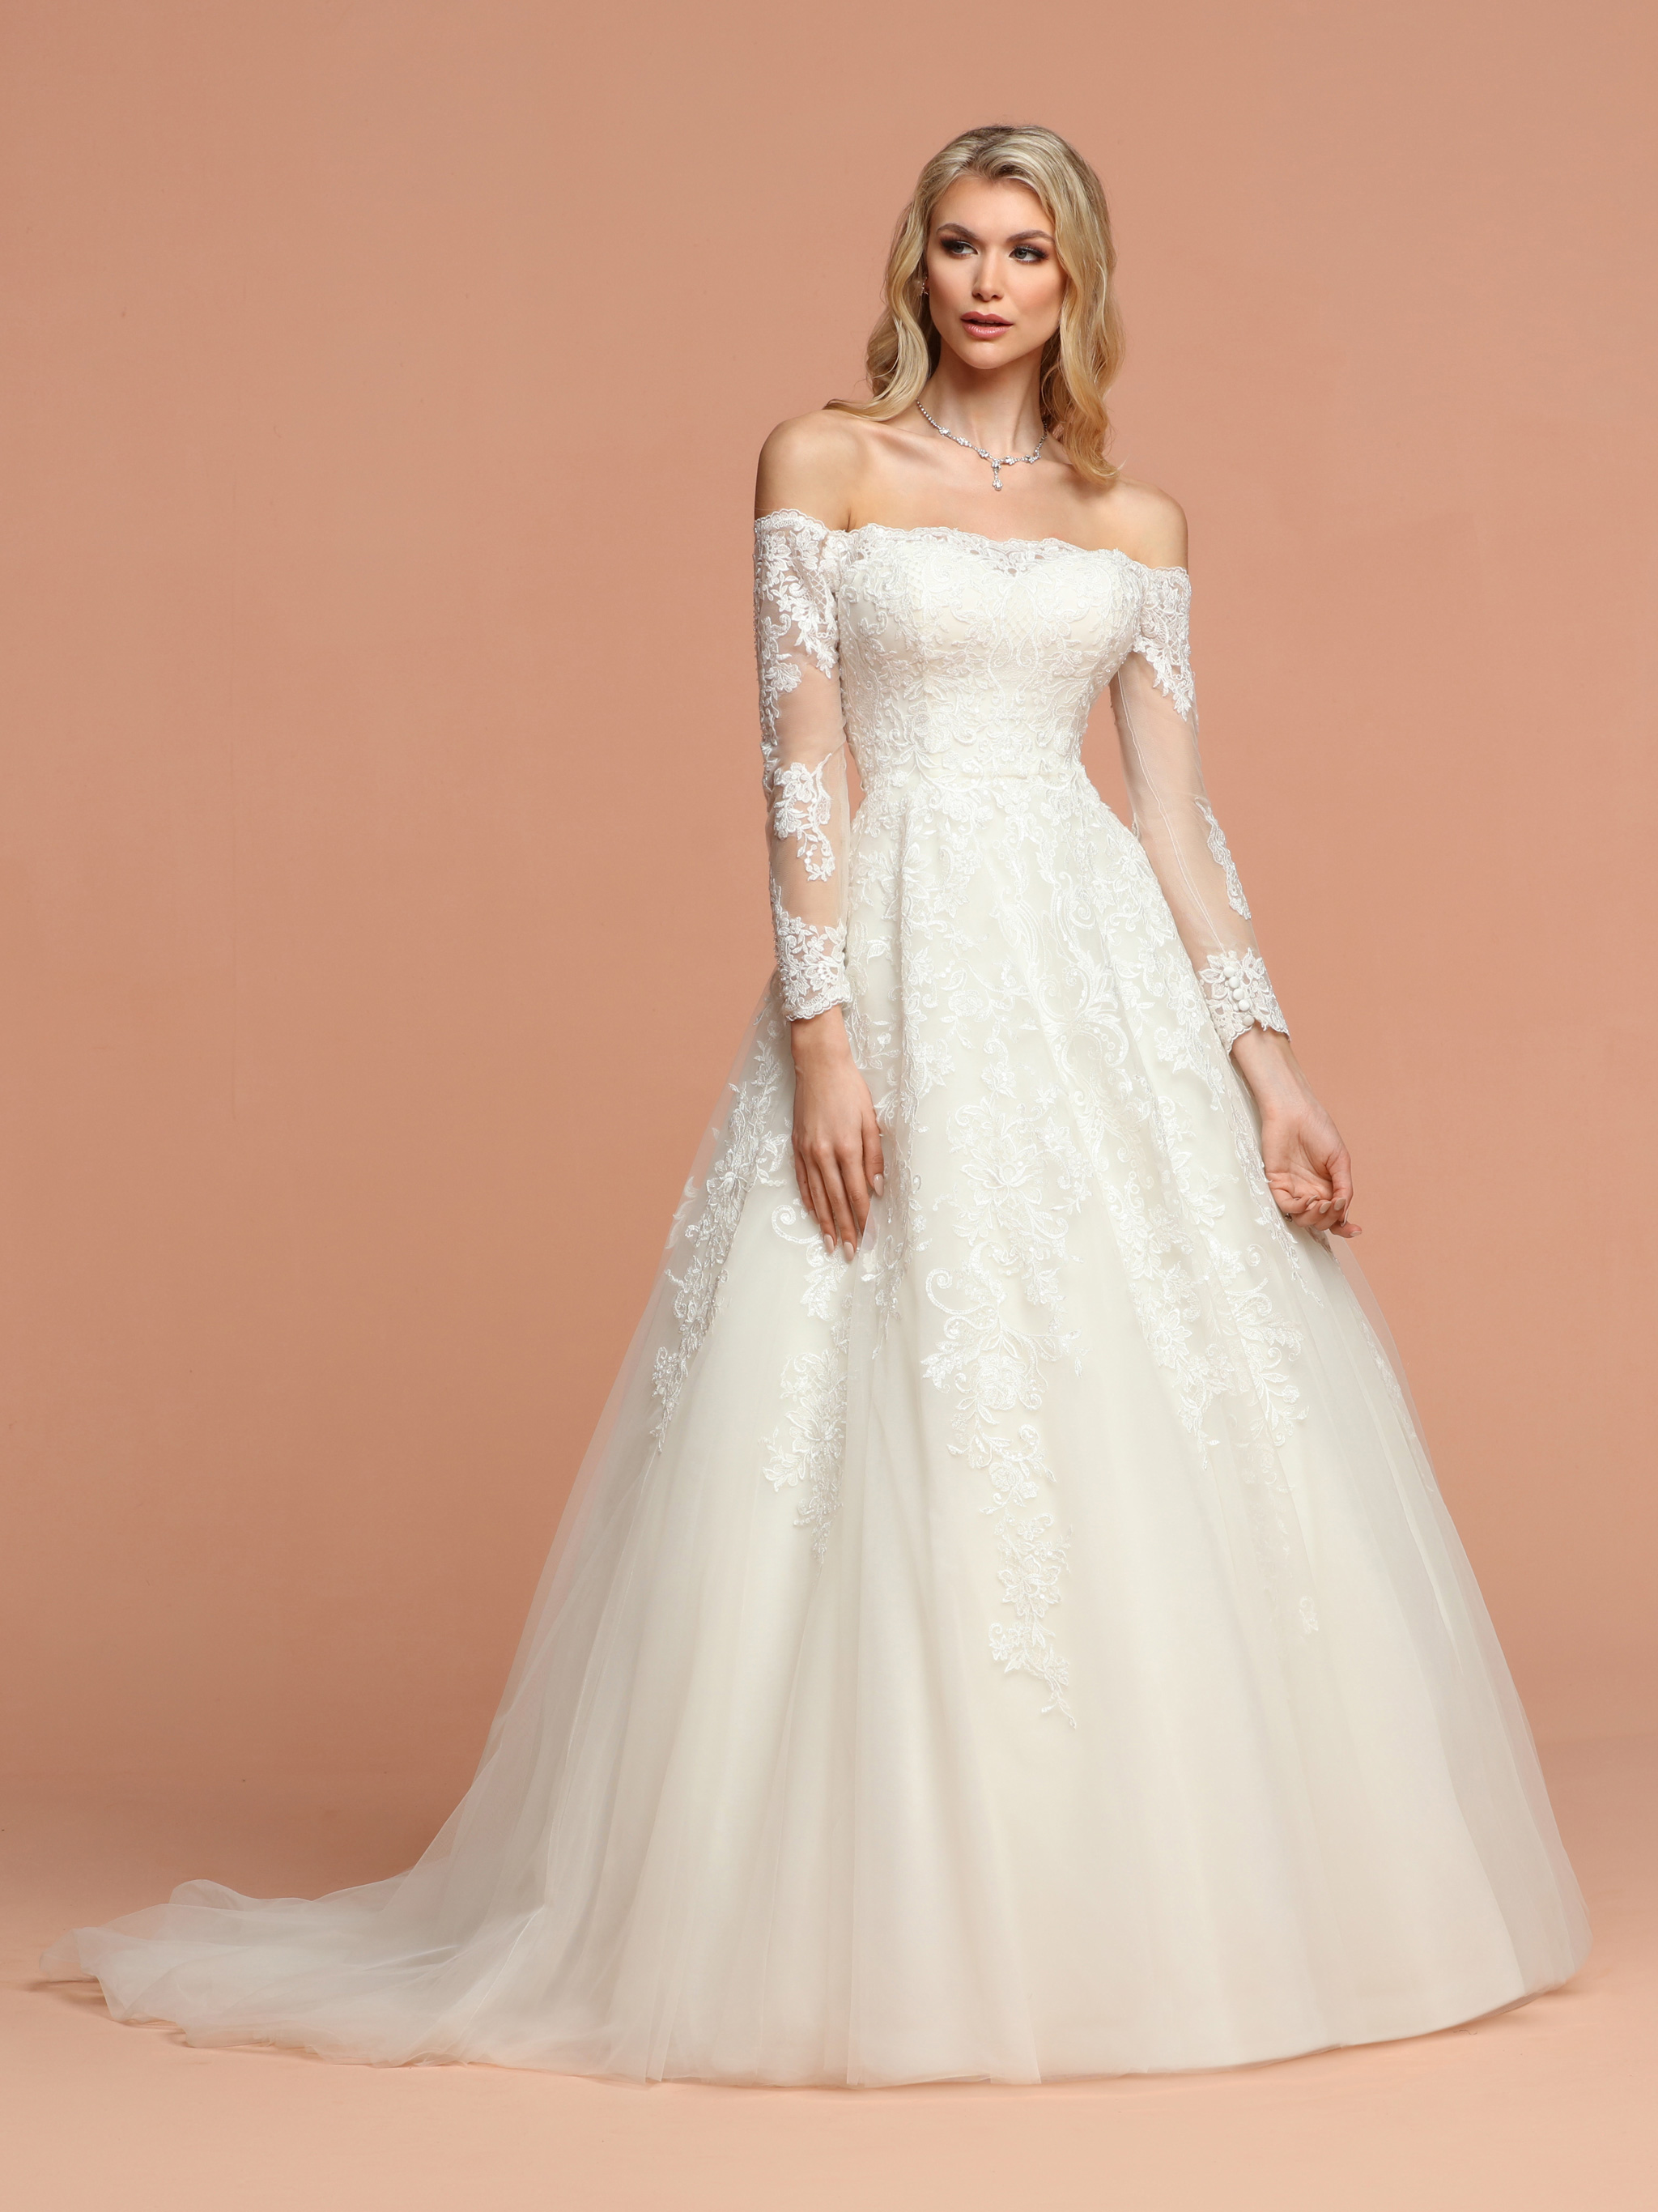 How to choose the wedding dress for each body type: main tips